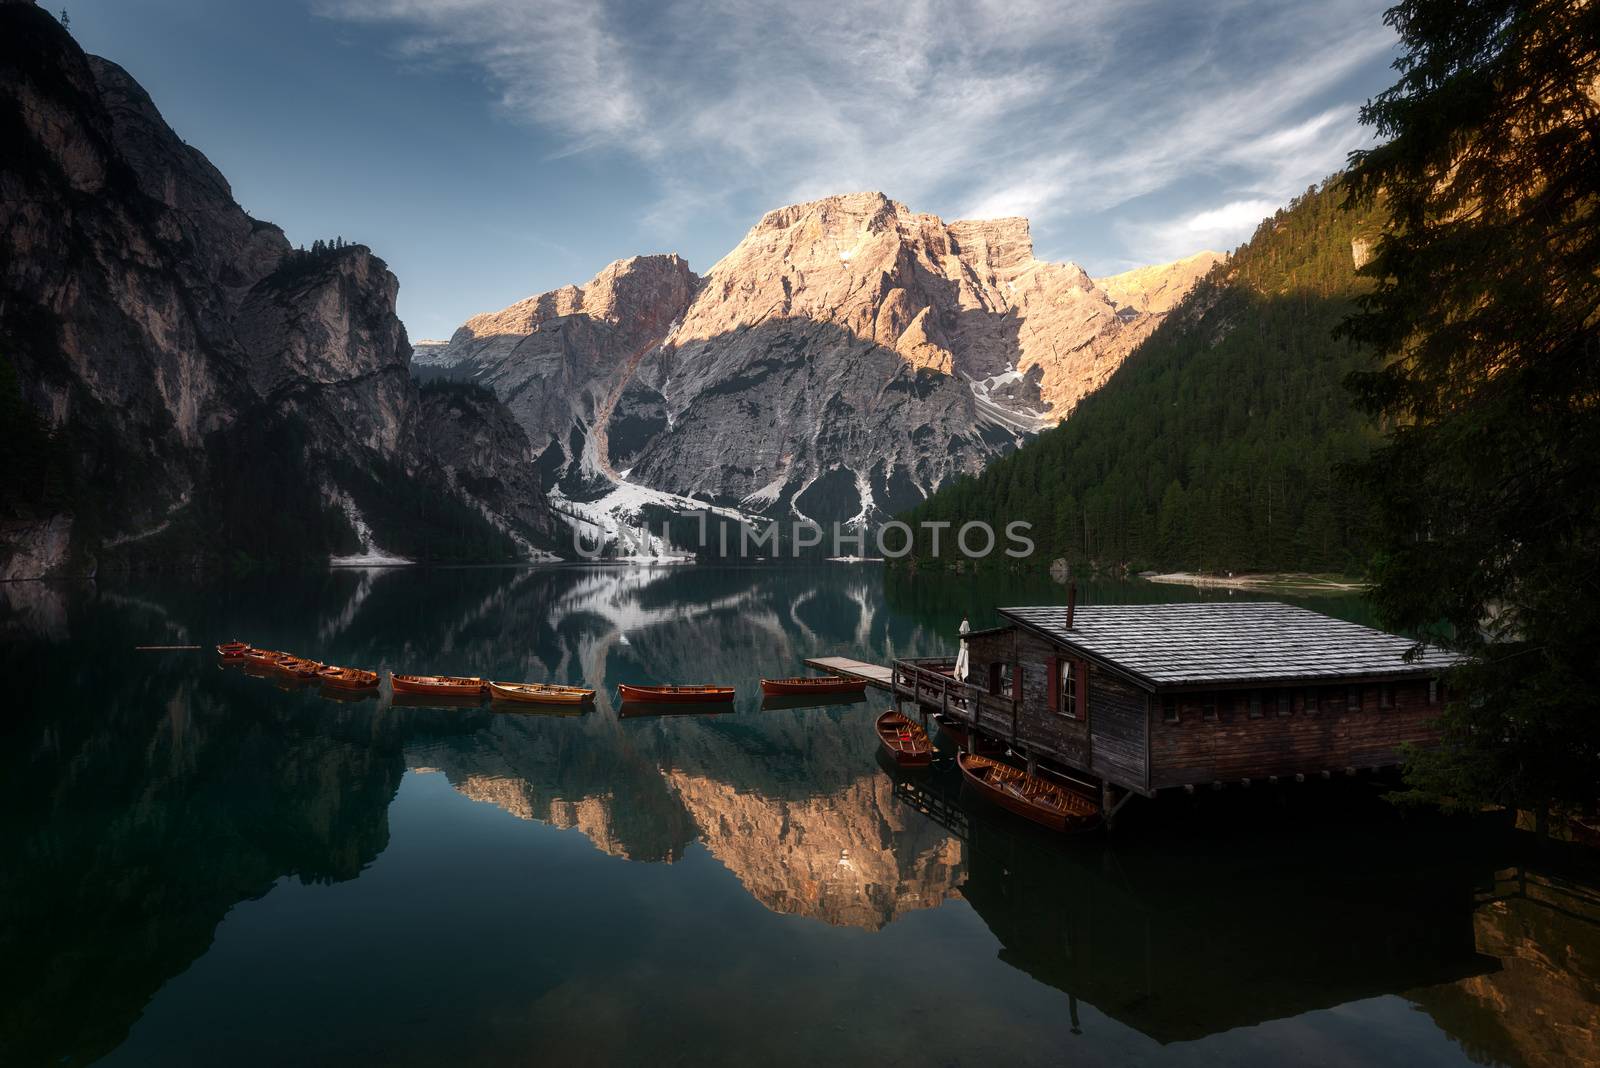 amazing view of braies lake with wooden boats on the water, surrounded by dolomites mountains. Trentino alto adige, Italy on the water, surrounded by dolomites mountains. Trentino alto adige, Italy by bhavik_jagani